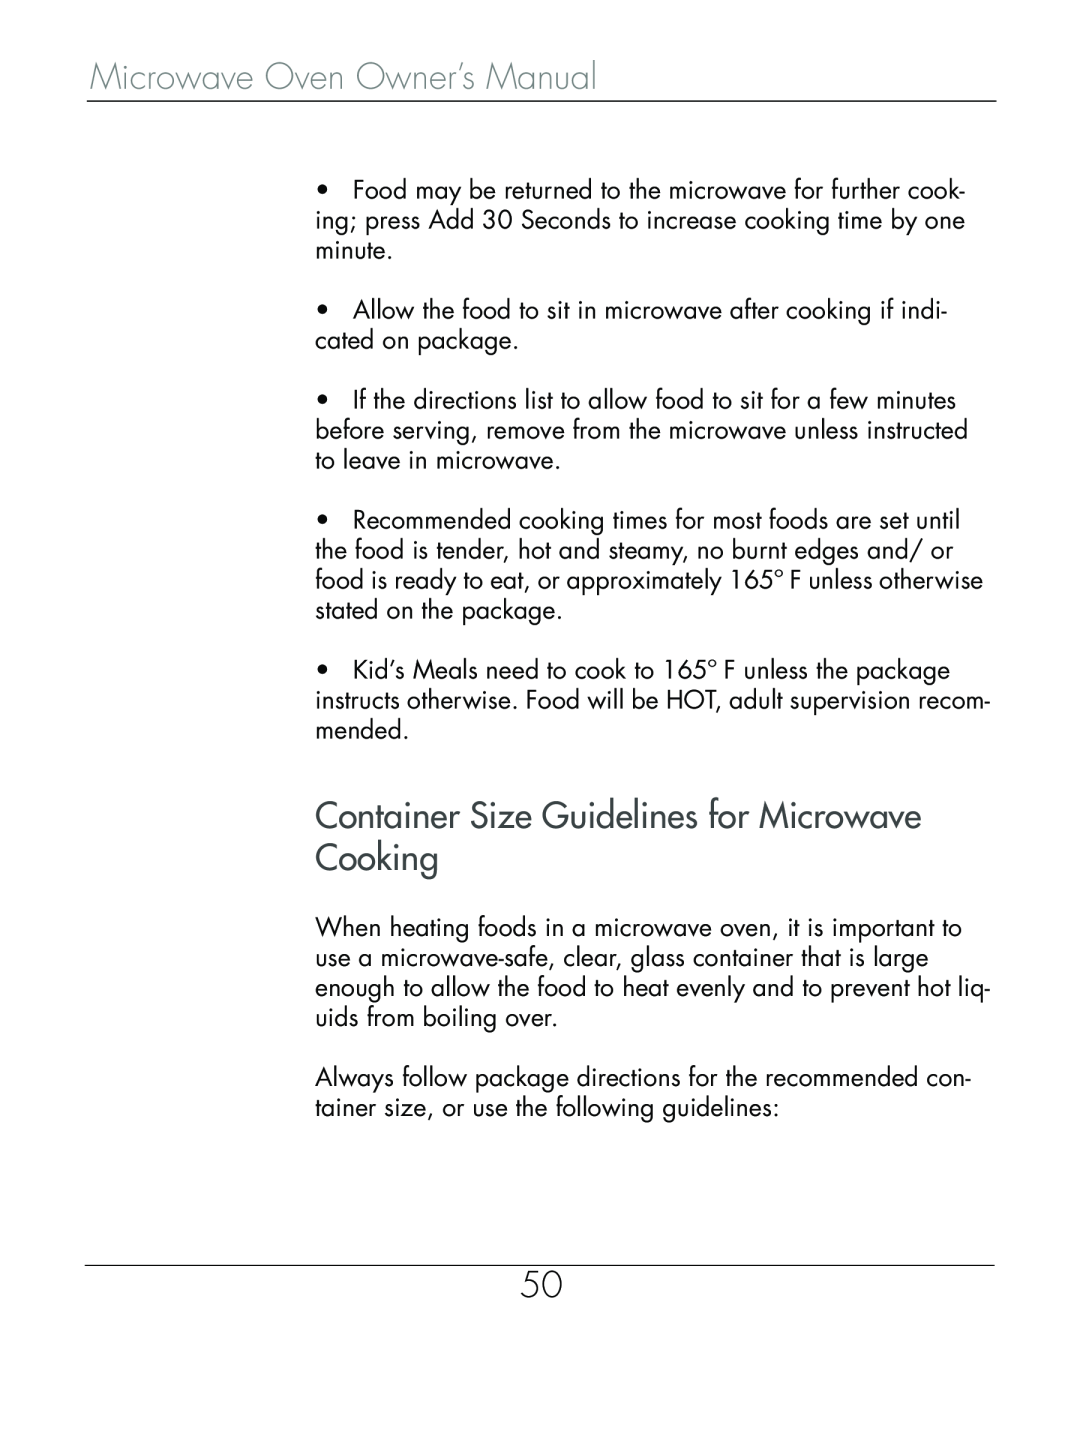 Beyond Microwace Oven manual Container Size Guidelines for Microwave Cooking 